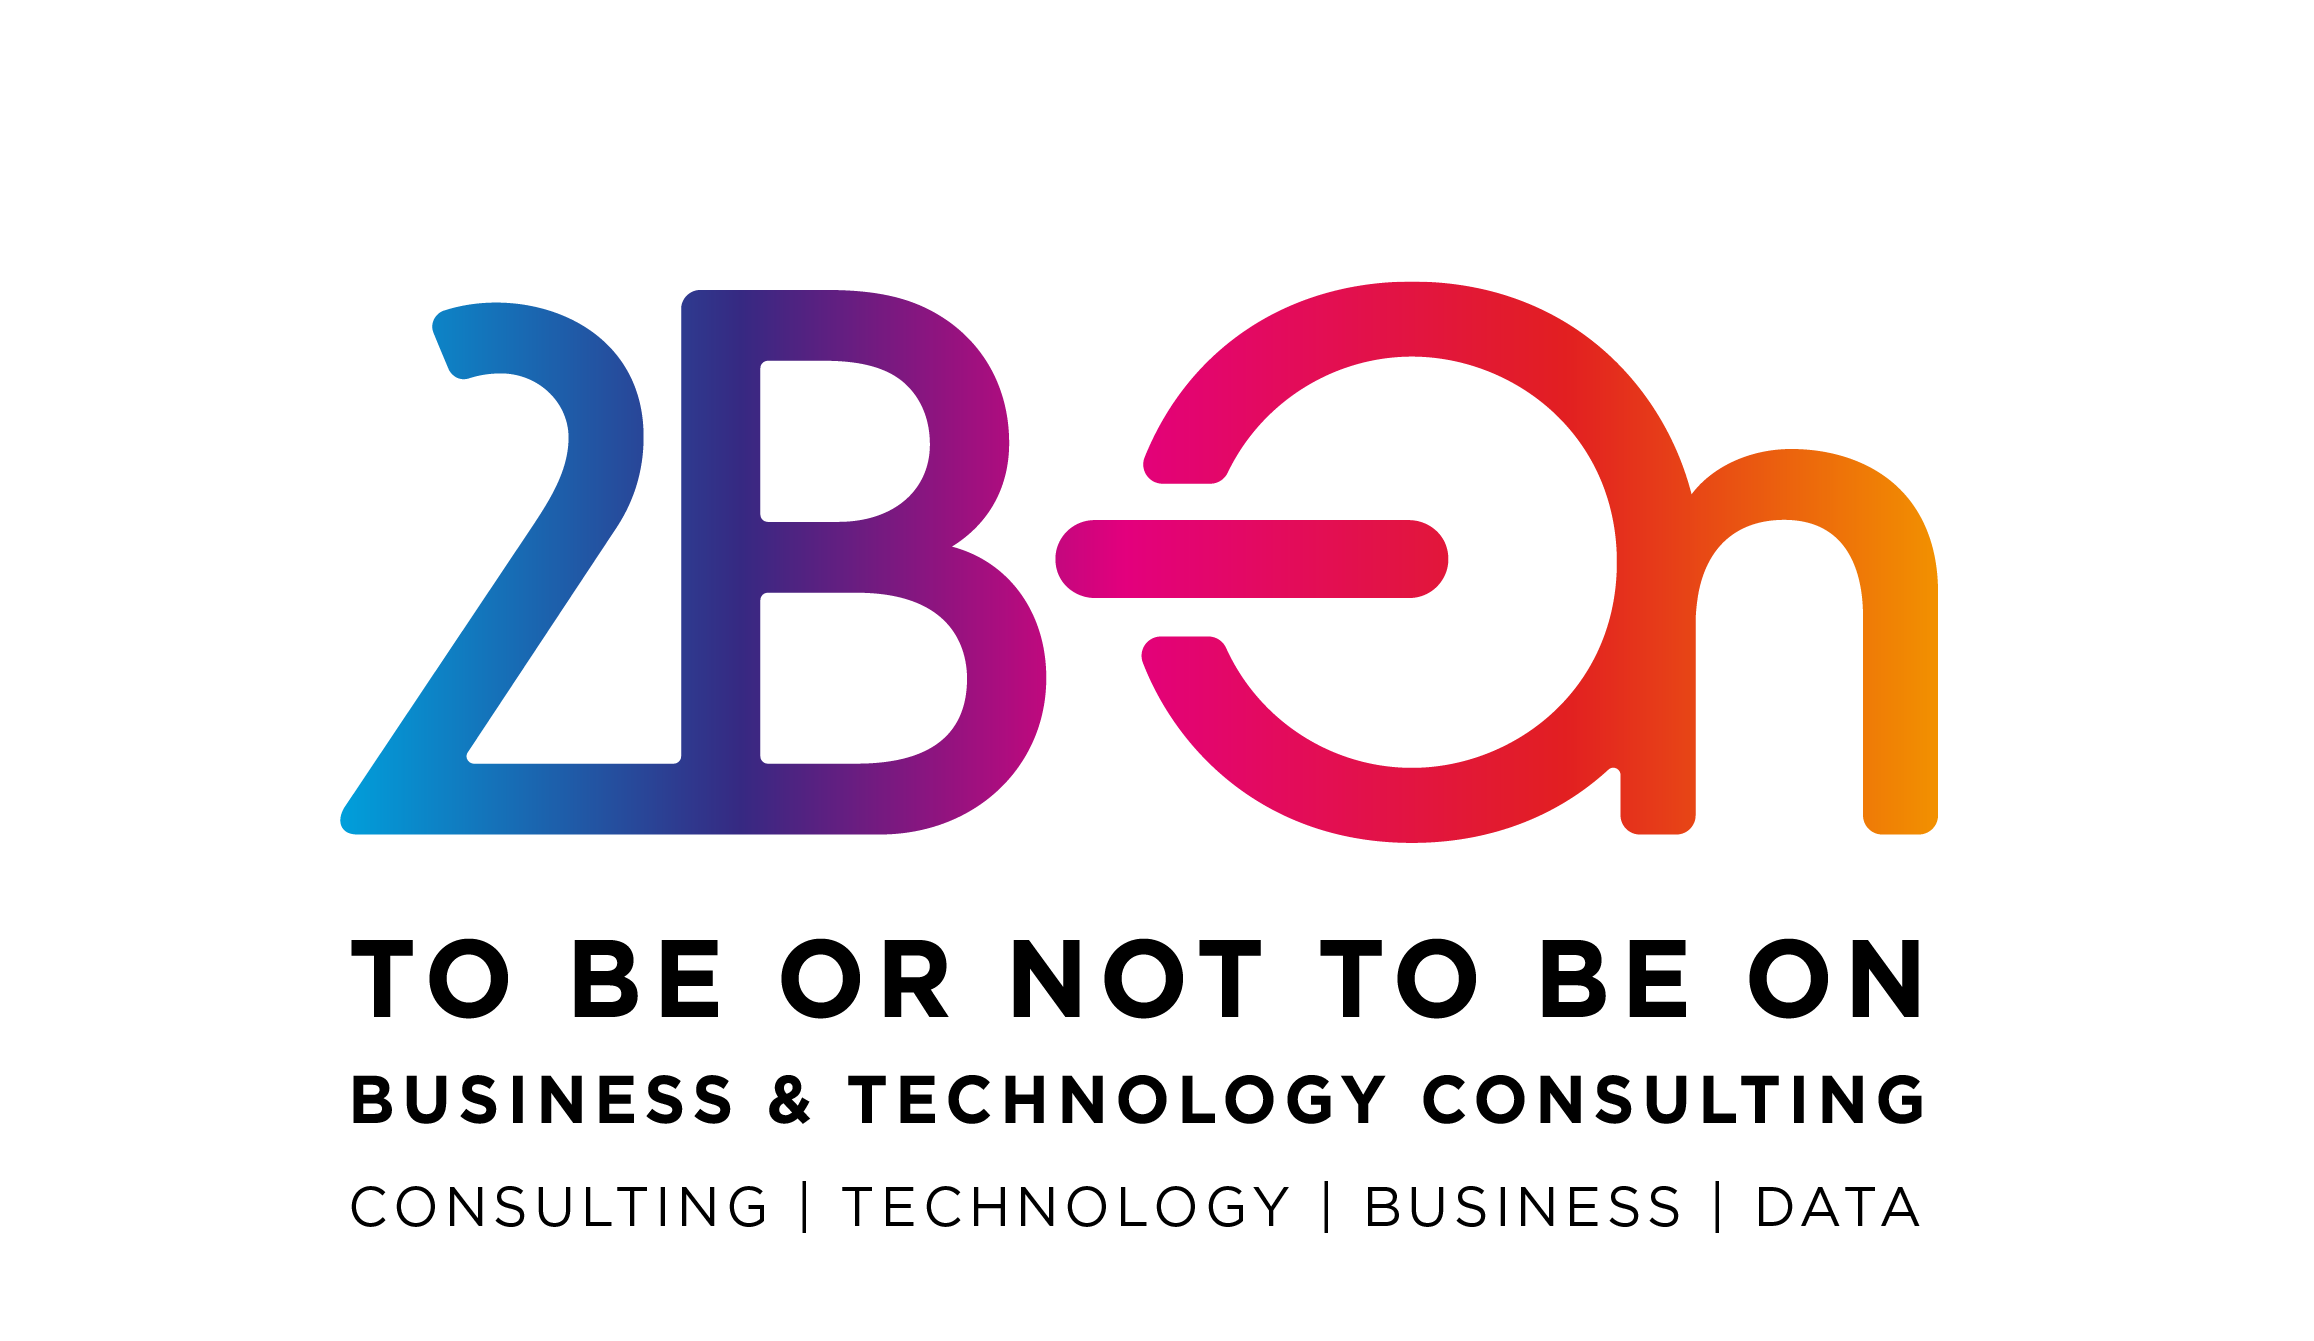 2B-On | BUSINESS & TECHNOLOGY CONSULTING 